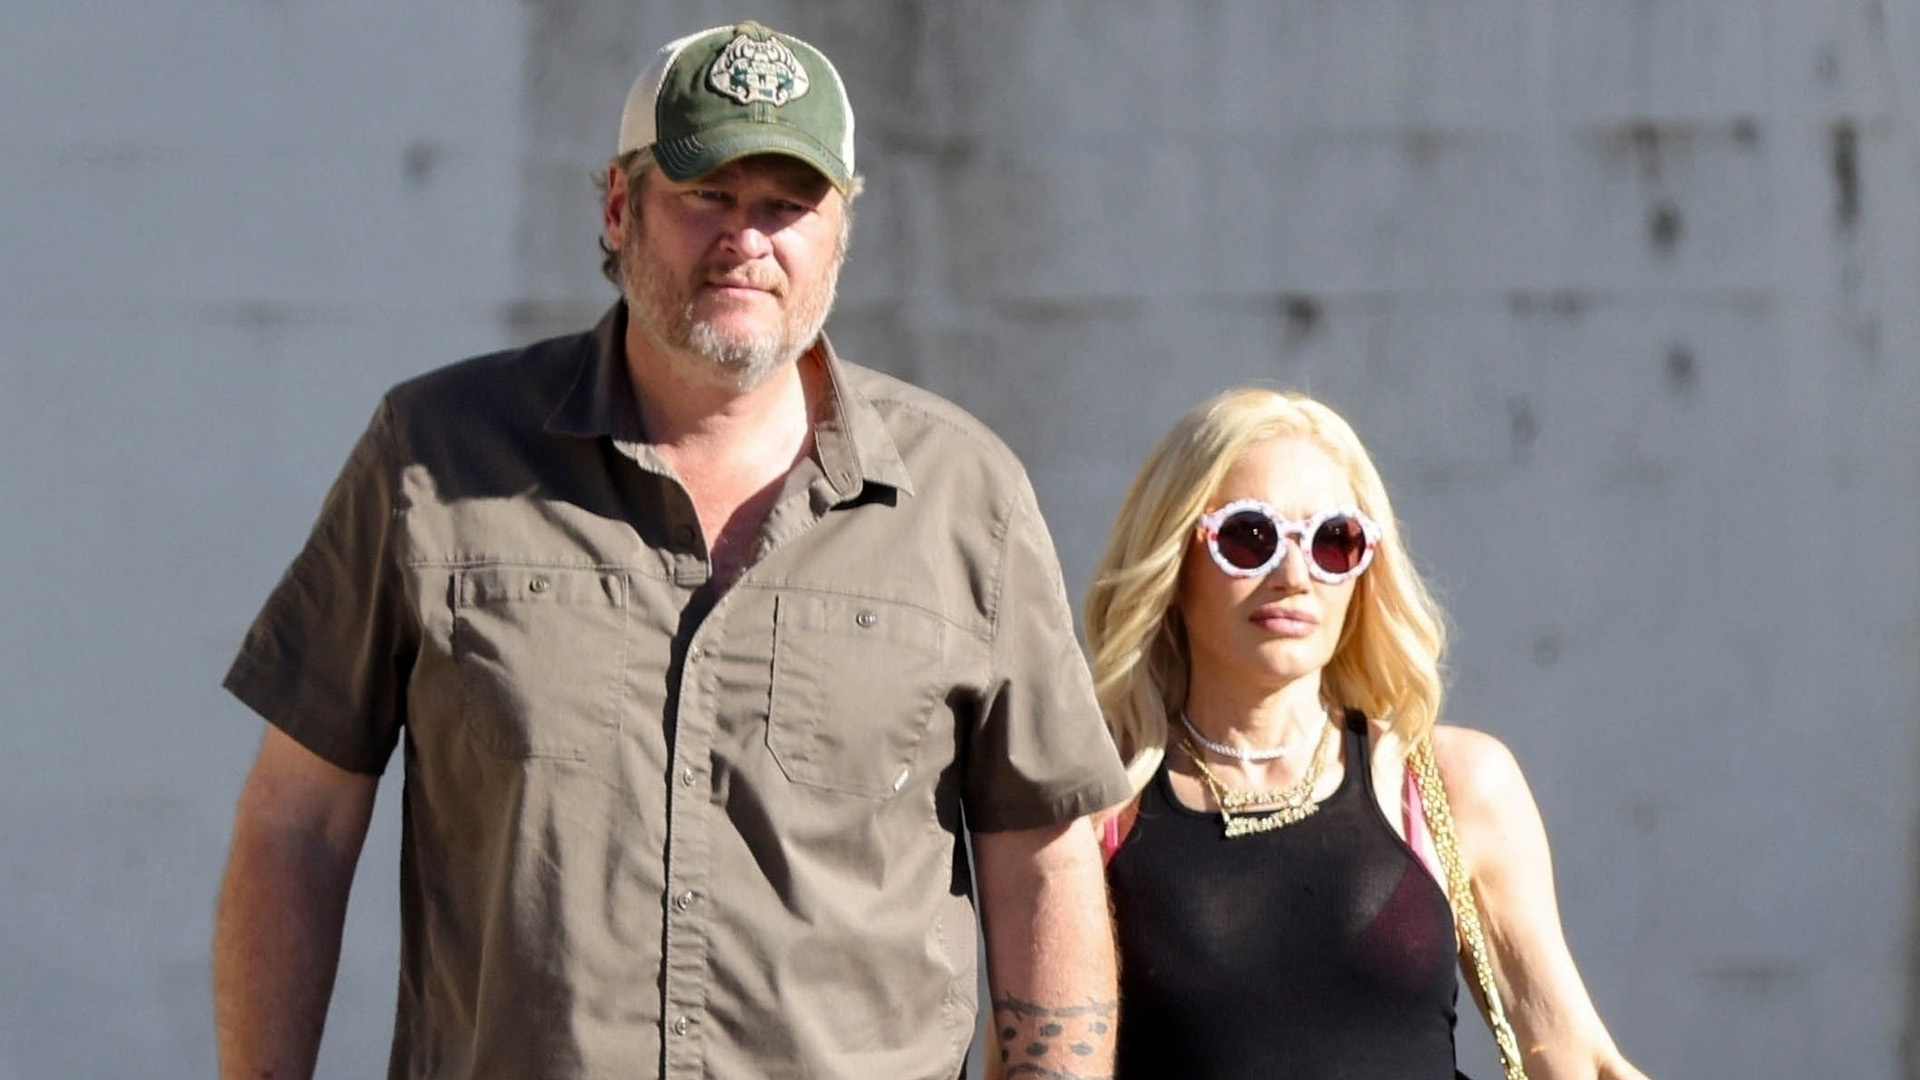 Gwen Stefani and Blake Shelton shut down split rumors as they hold hands and get close during rare public outing in LA